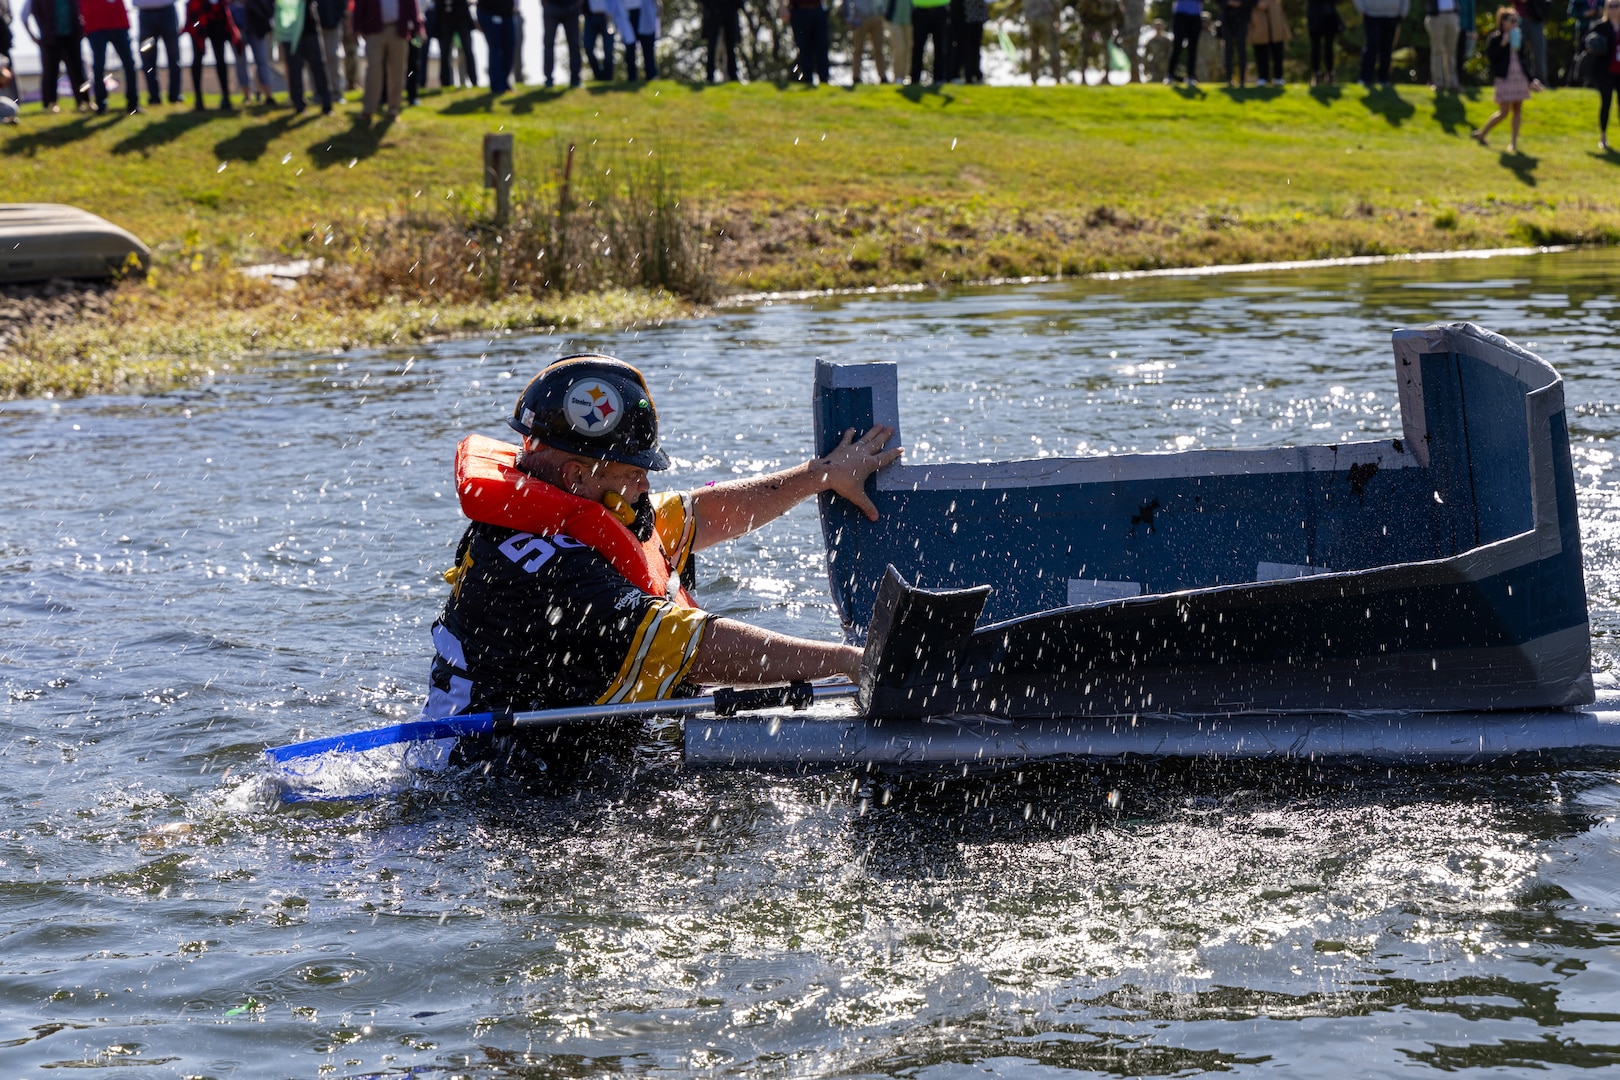 A man in a Steelers outfit tries to get aboard his cardboard boat in a pond after it capsized. The boat is square with an open back and is gray.